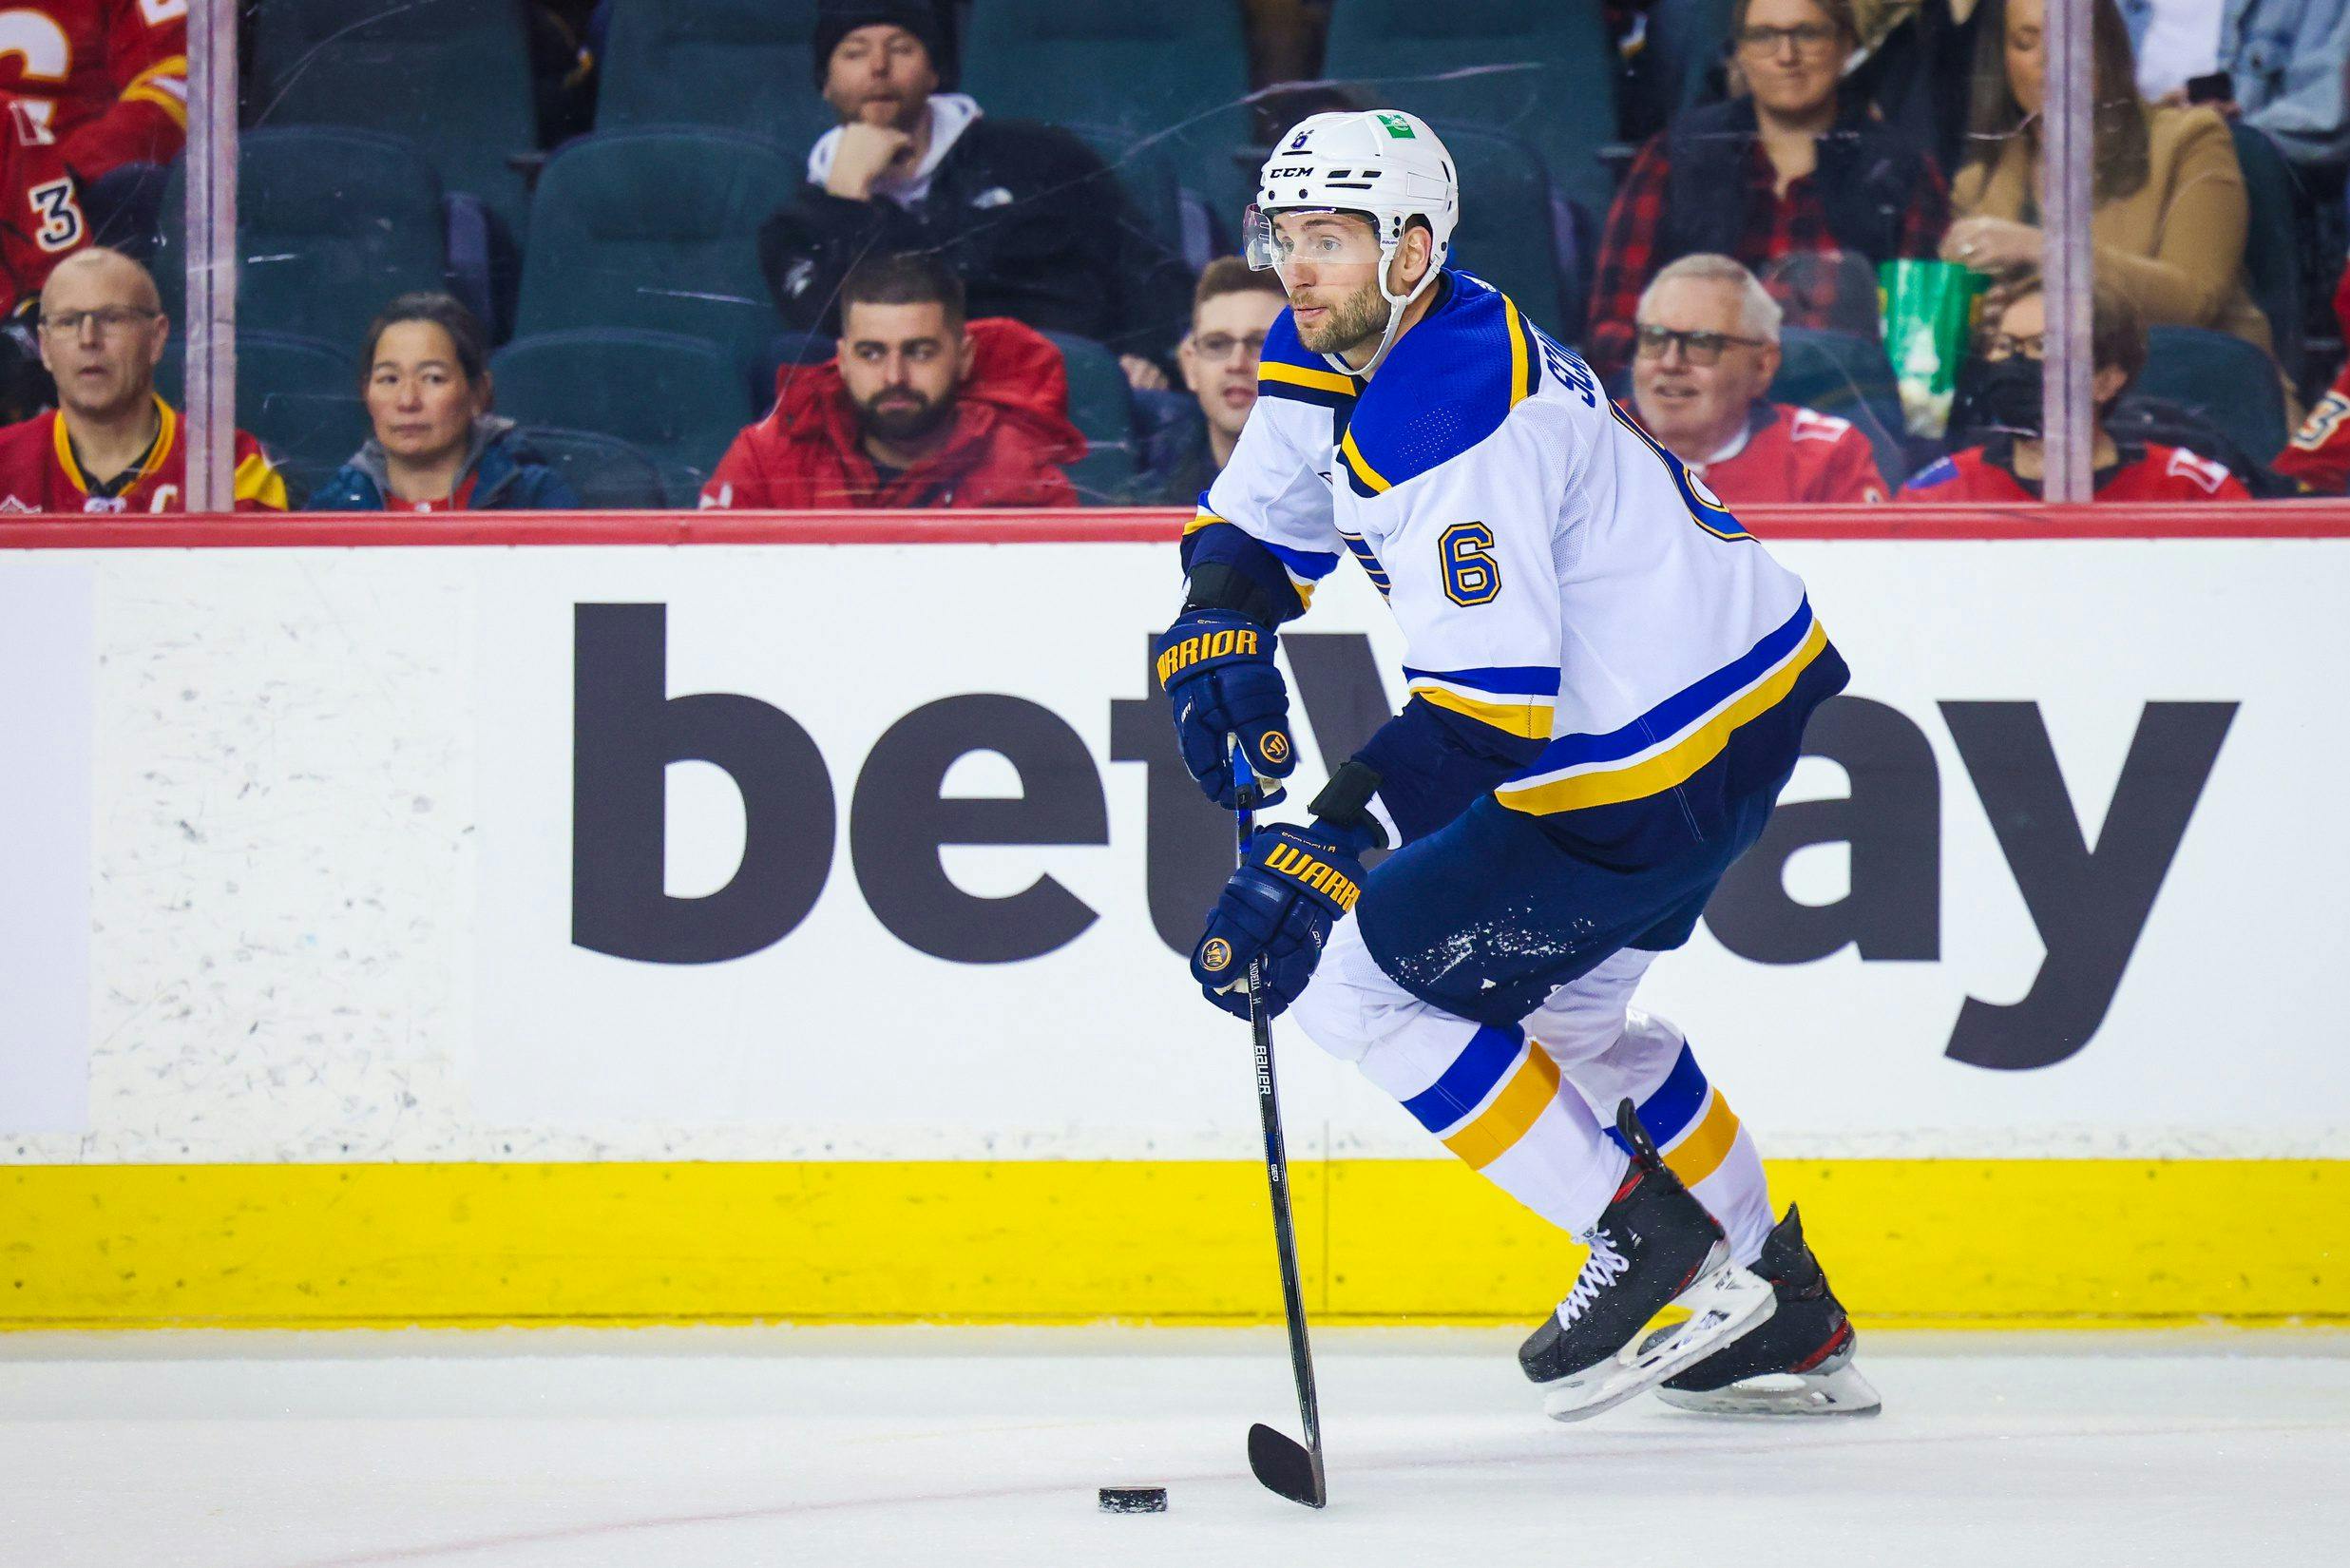 St. Louis Blues’ Marco Scandella to miss the remainder of season with lower-body injury